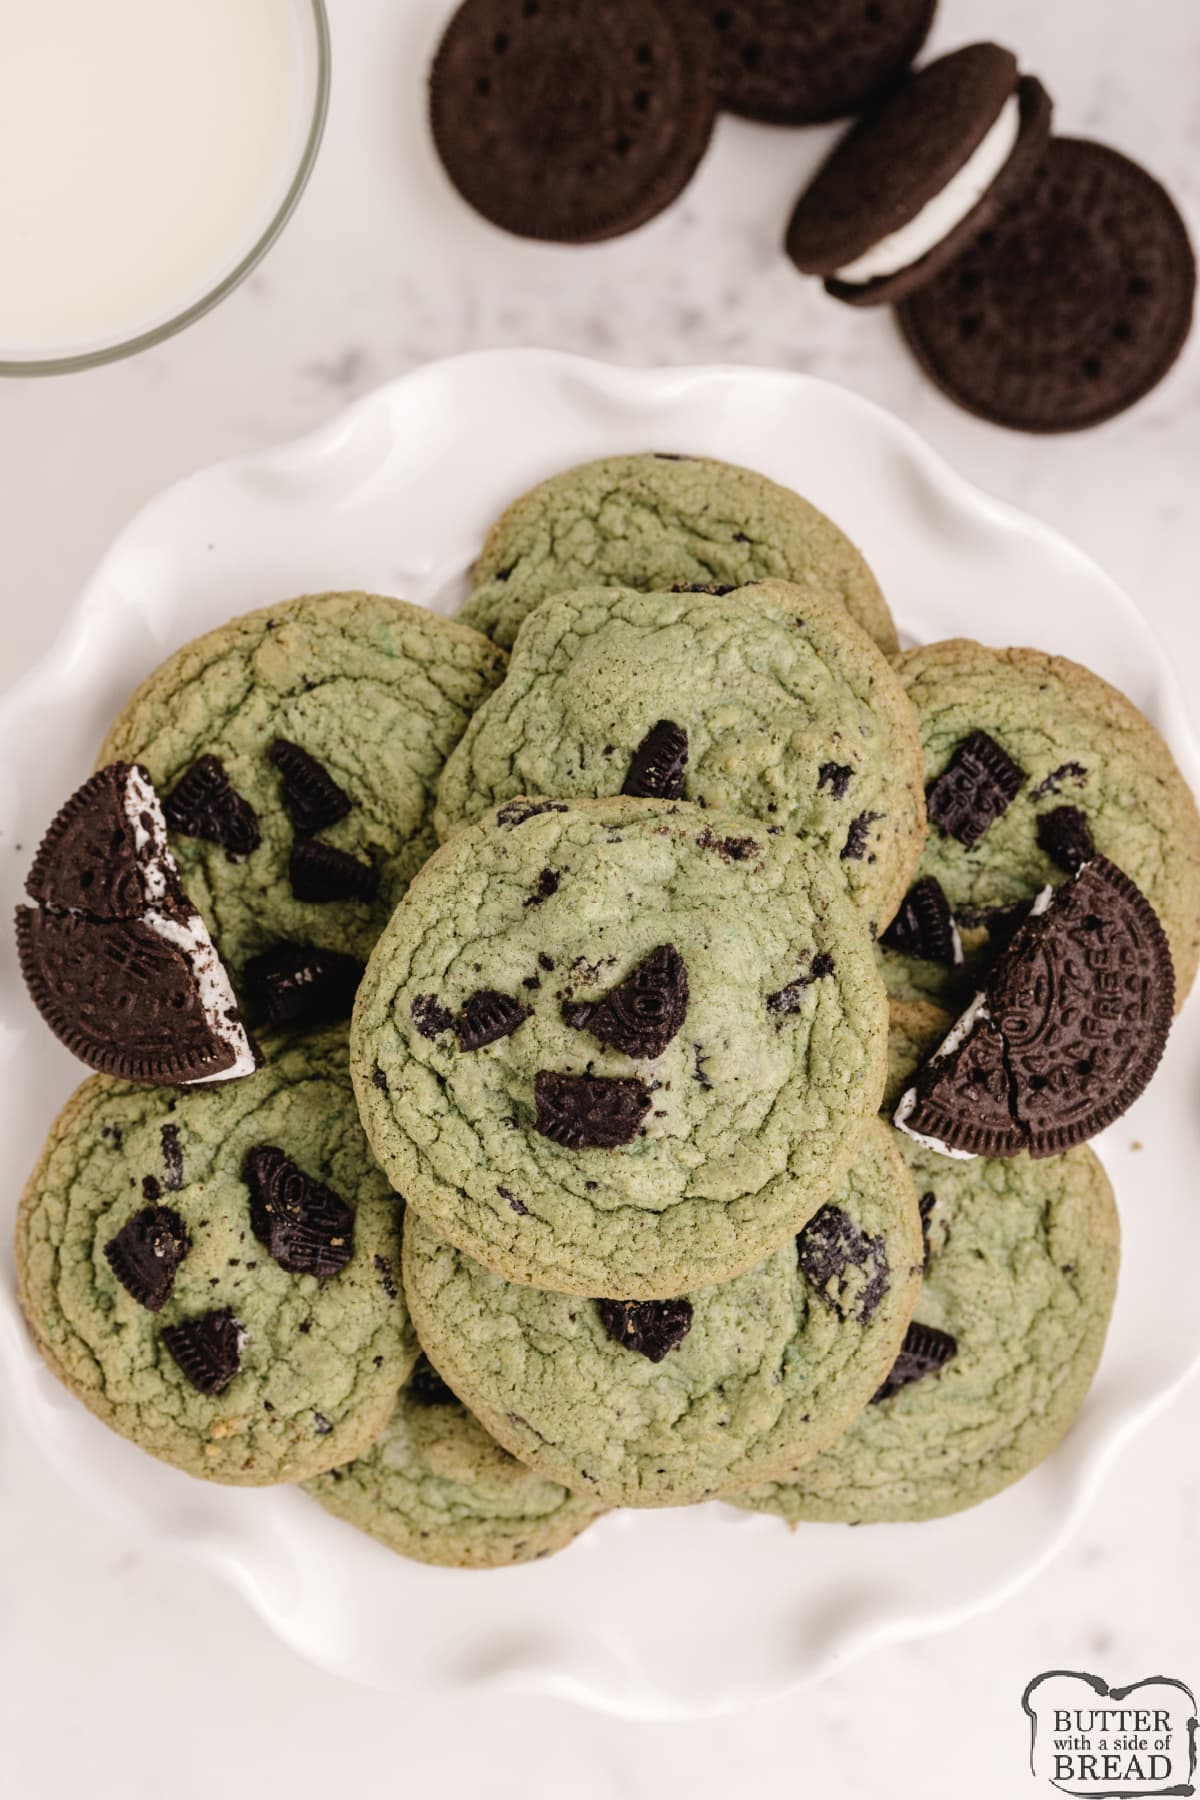 Mint Oreo Pudding Cookies are made with Oreo pudding mix and crumbled Mint Oreo cookies. These chocolate mint cookies turn out perfectly soft and chewy every time!